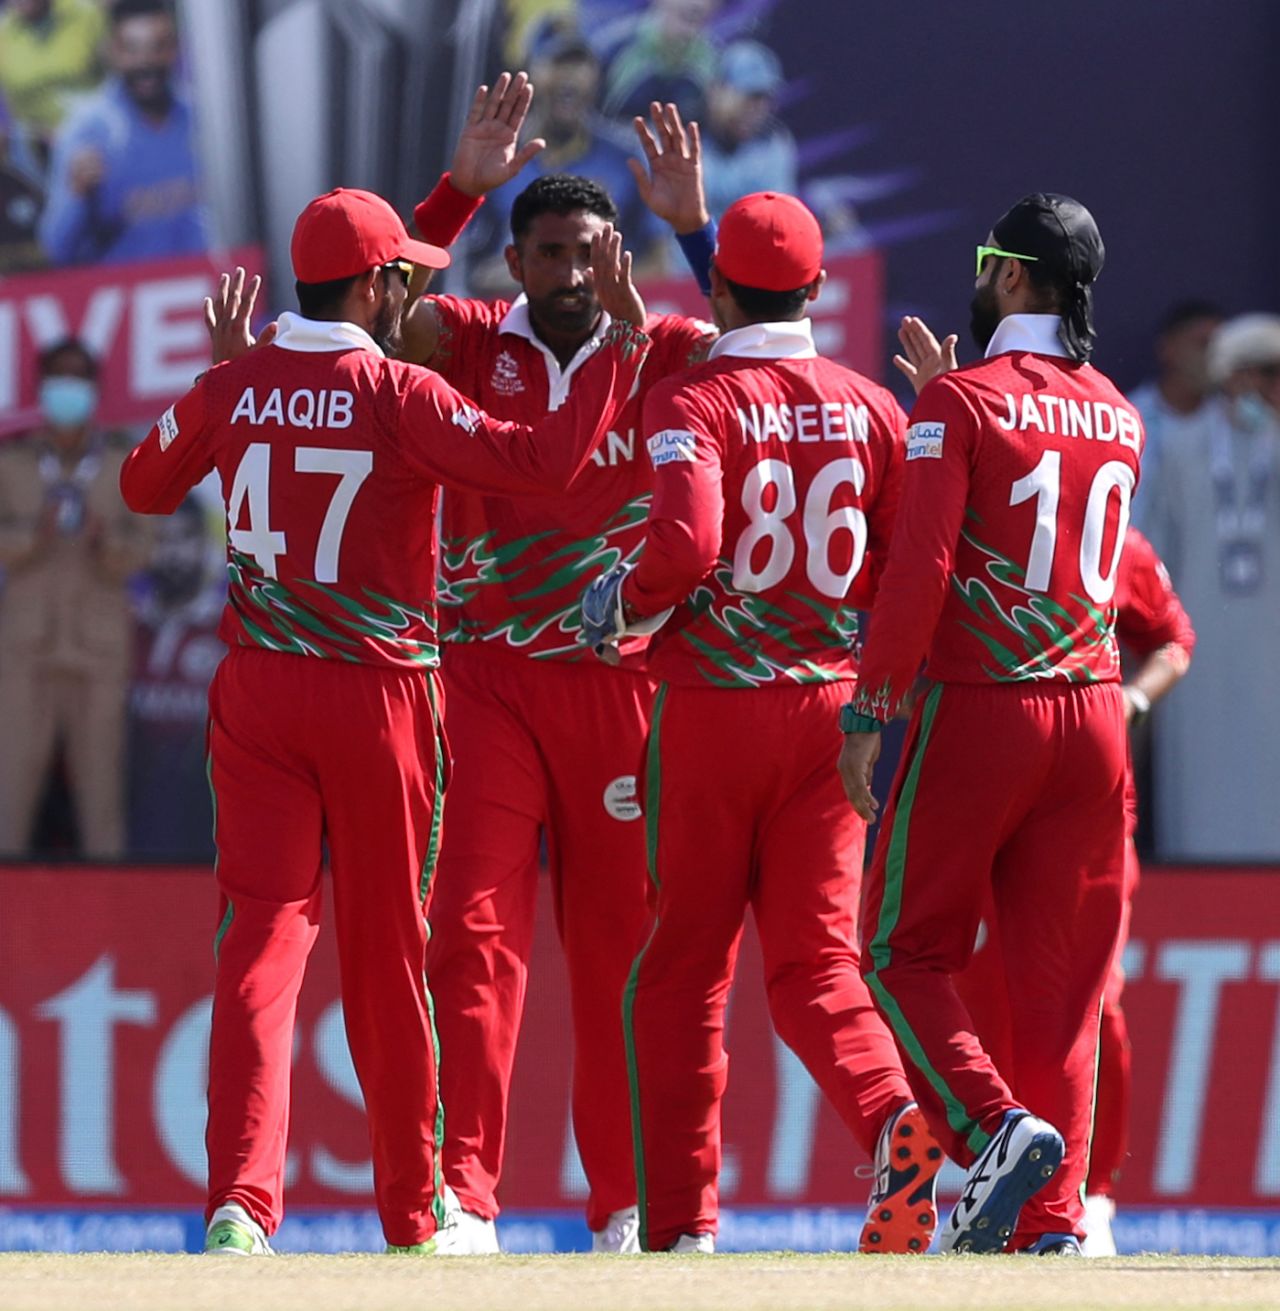 Kaleemullah celebrates a wicket with his team-mates, Oman vs Papua New Guinea, T20 World Cup, Muscat, October 17, 2021